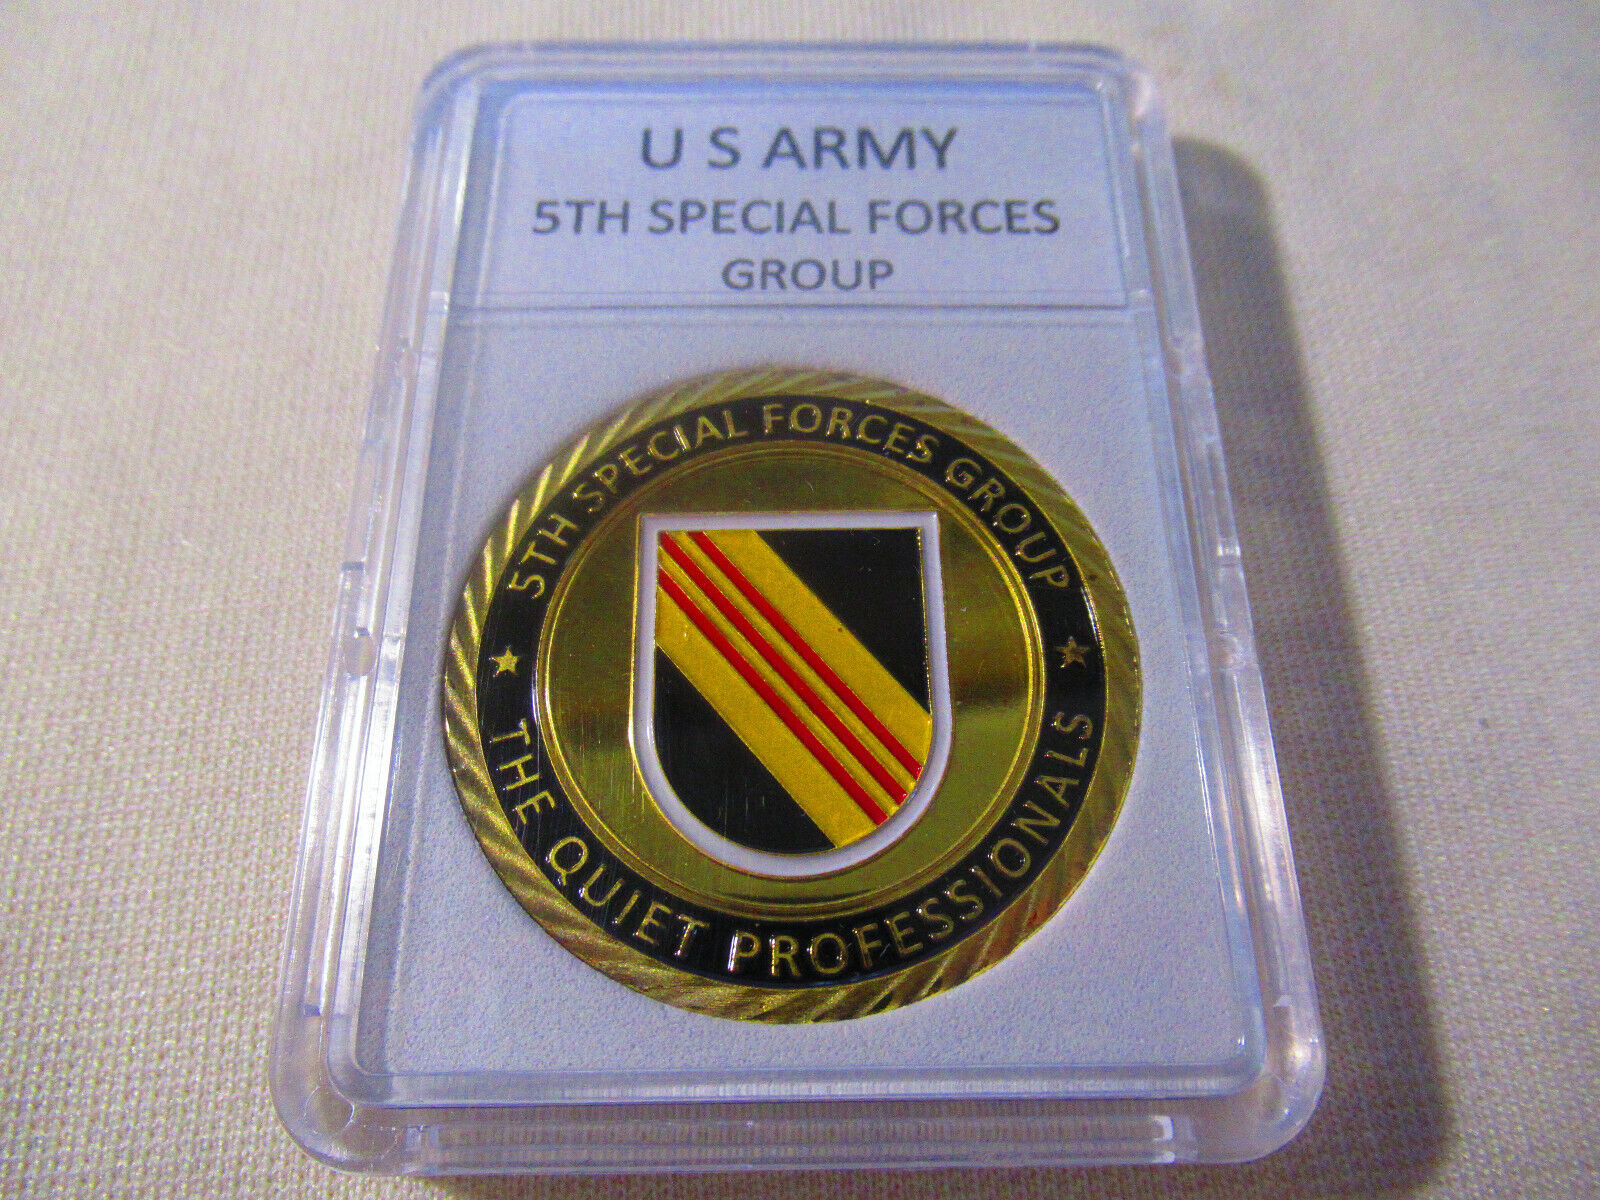 U S ARMY 5th SPECIAL FORCES GROUP (Airborne) Challenge Coin